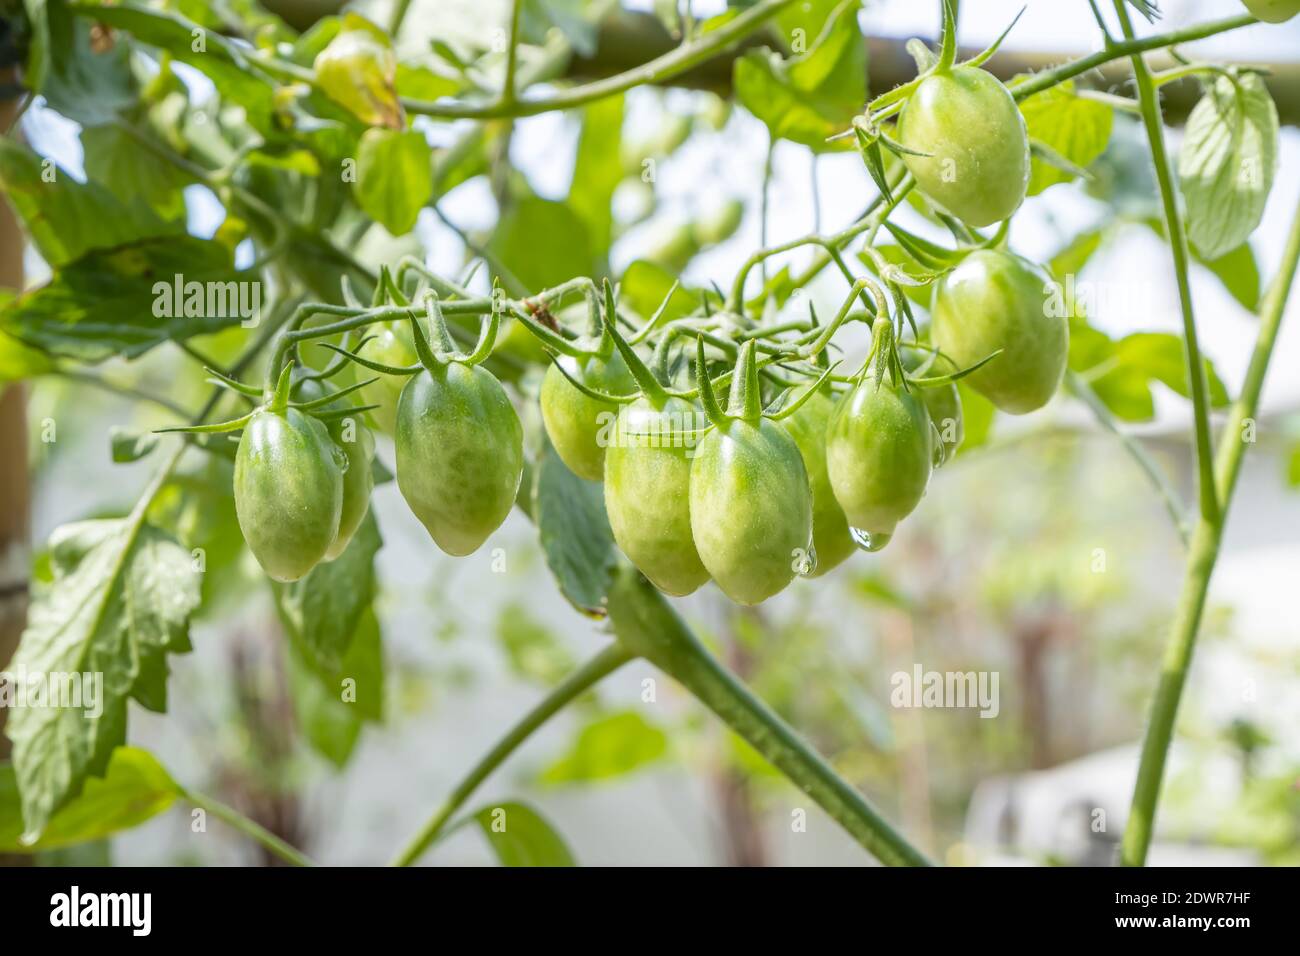 There are many green Cherry tomatoes or Lycopersicon esculentum on the tree. Stock Photo